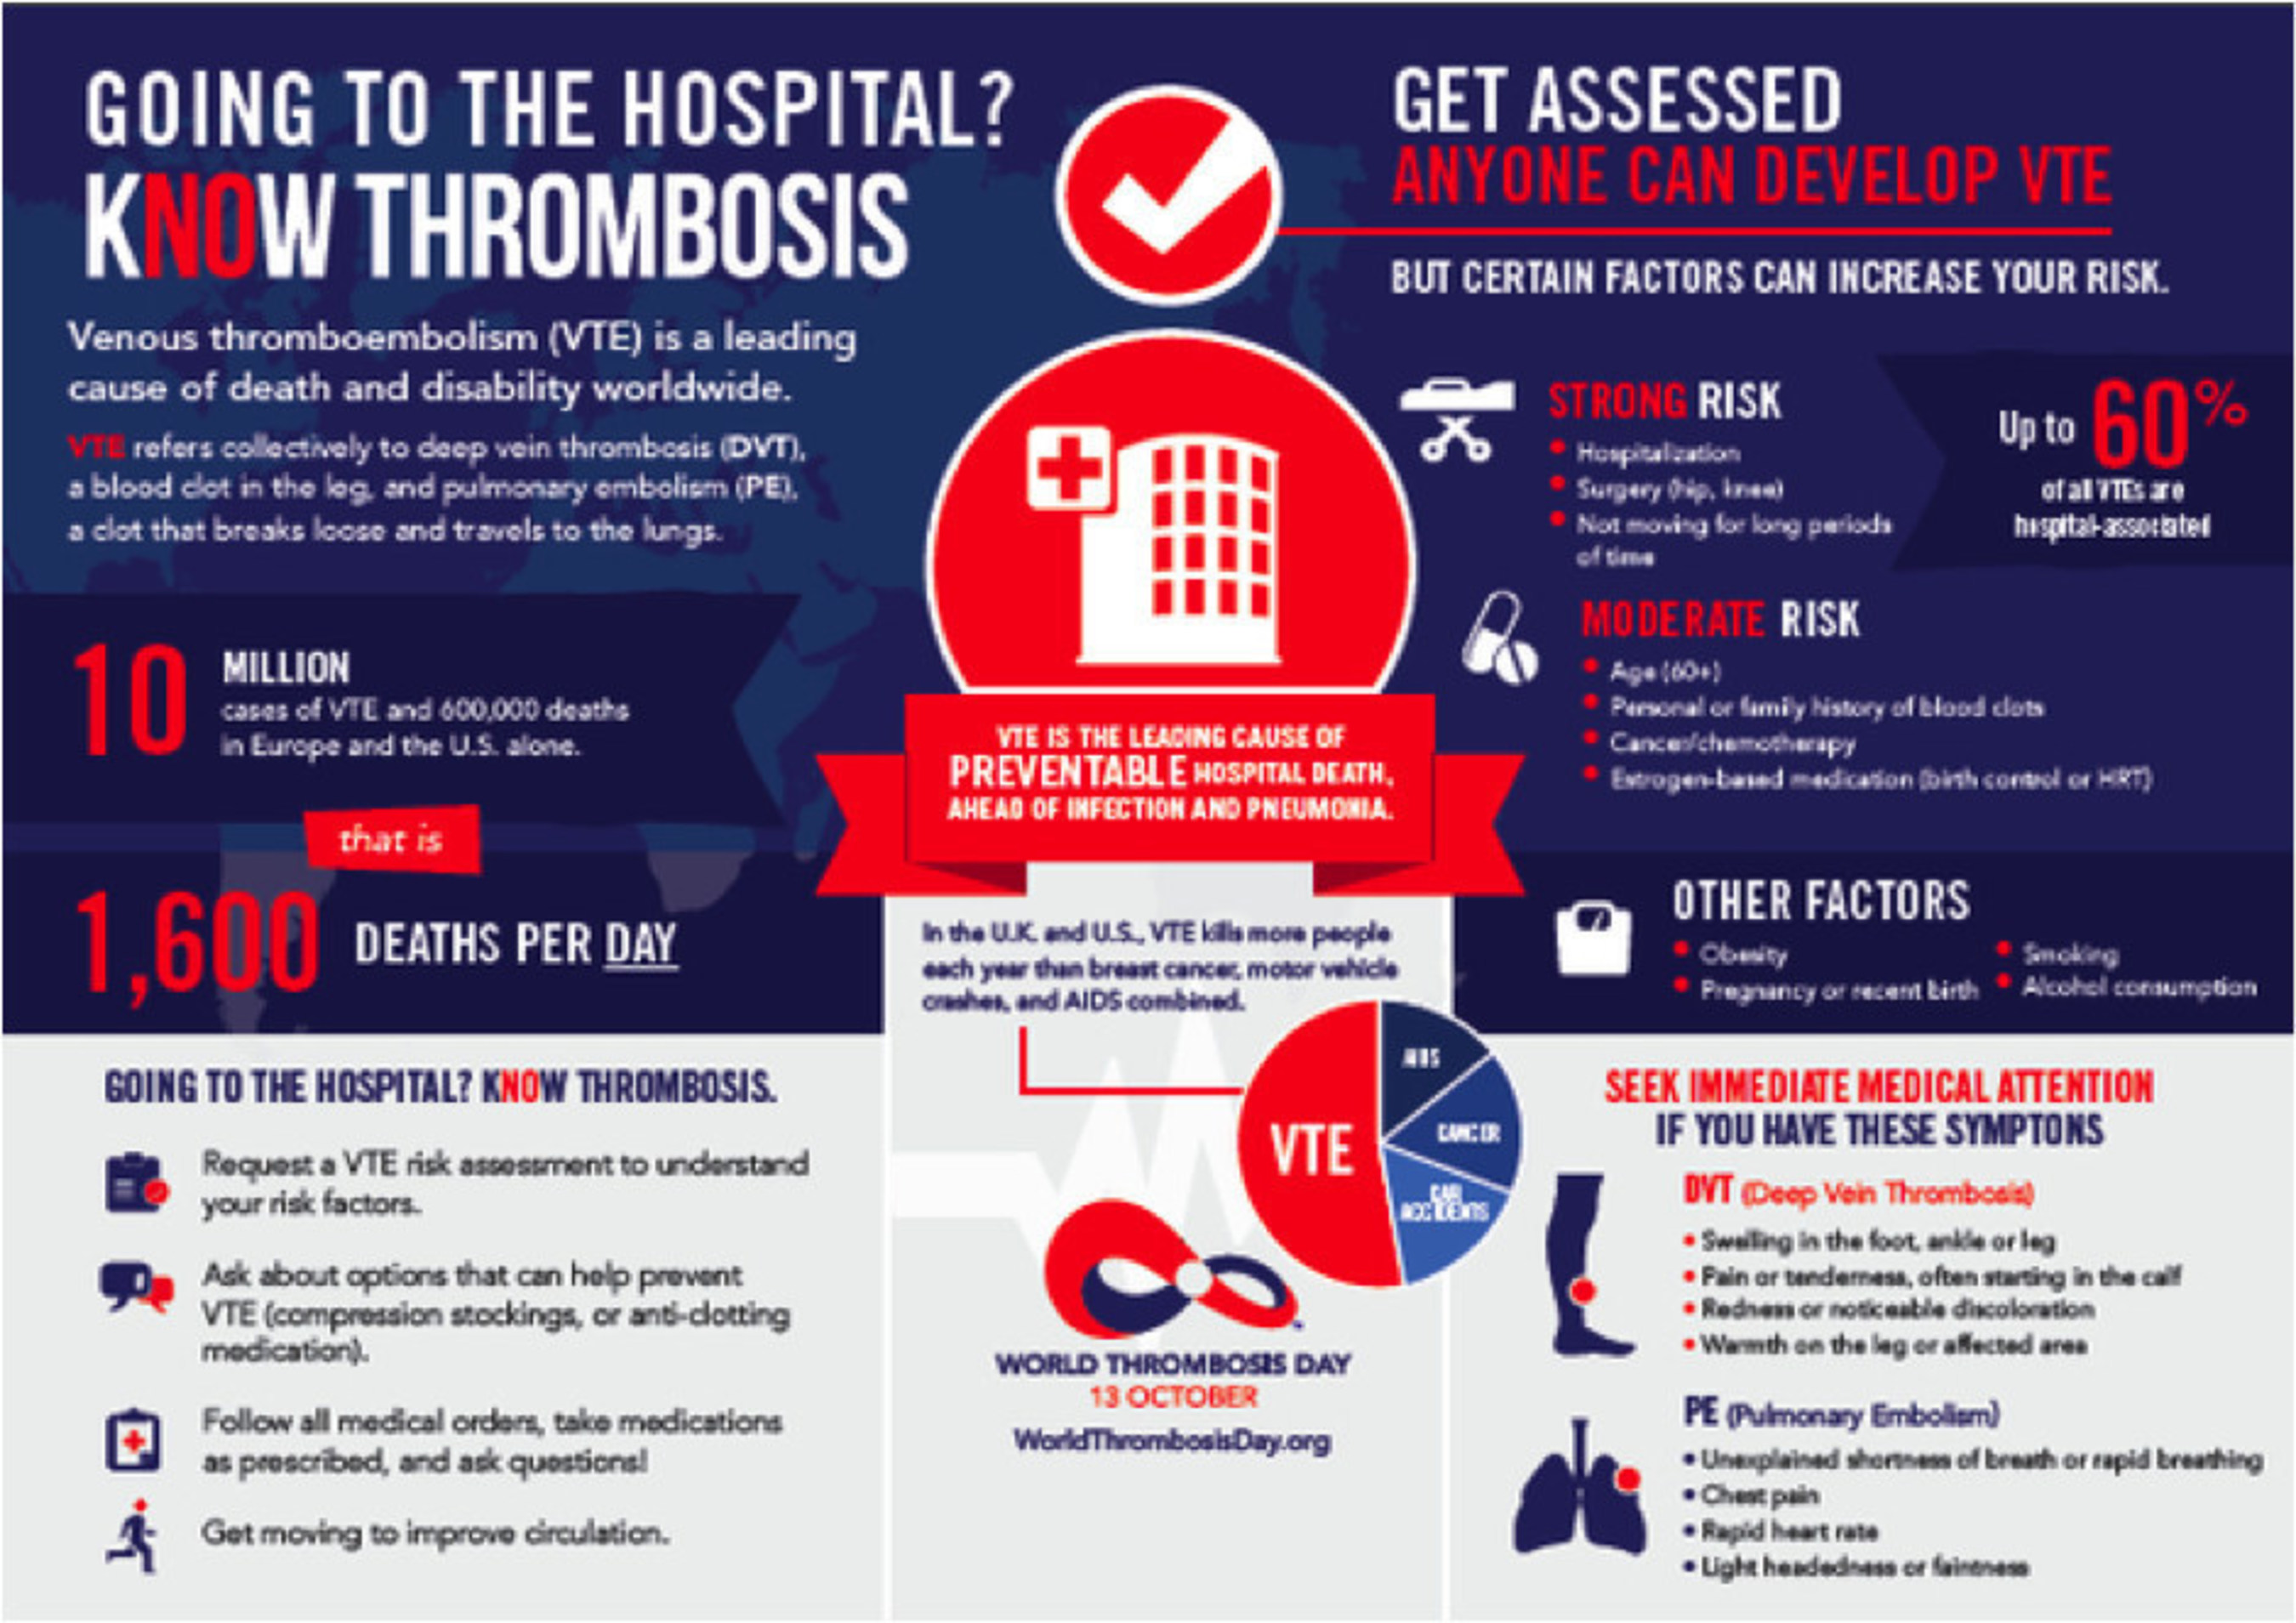 Venous thromboembolism (commonly known as blood clots) is a leading cause of death and disability worldwide.  Anyone can develop blood clots. Make sure you and your loved ones are assessed before undergoing a hospital procedure.  Ask about options to help prevent blood clots, such as intermittent pneumatic compression devices and anti-clotting medication.